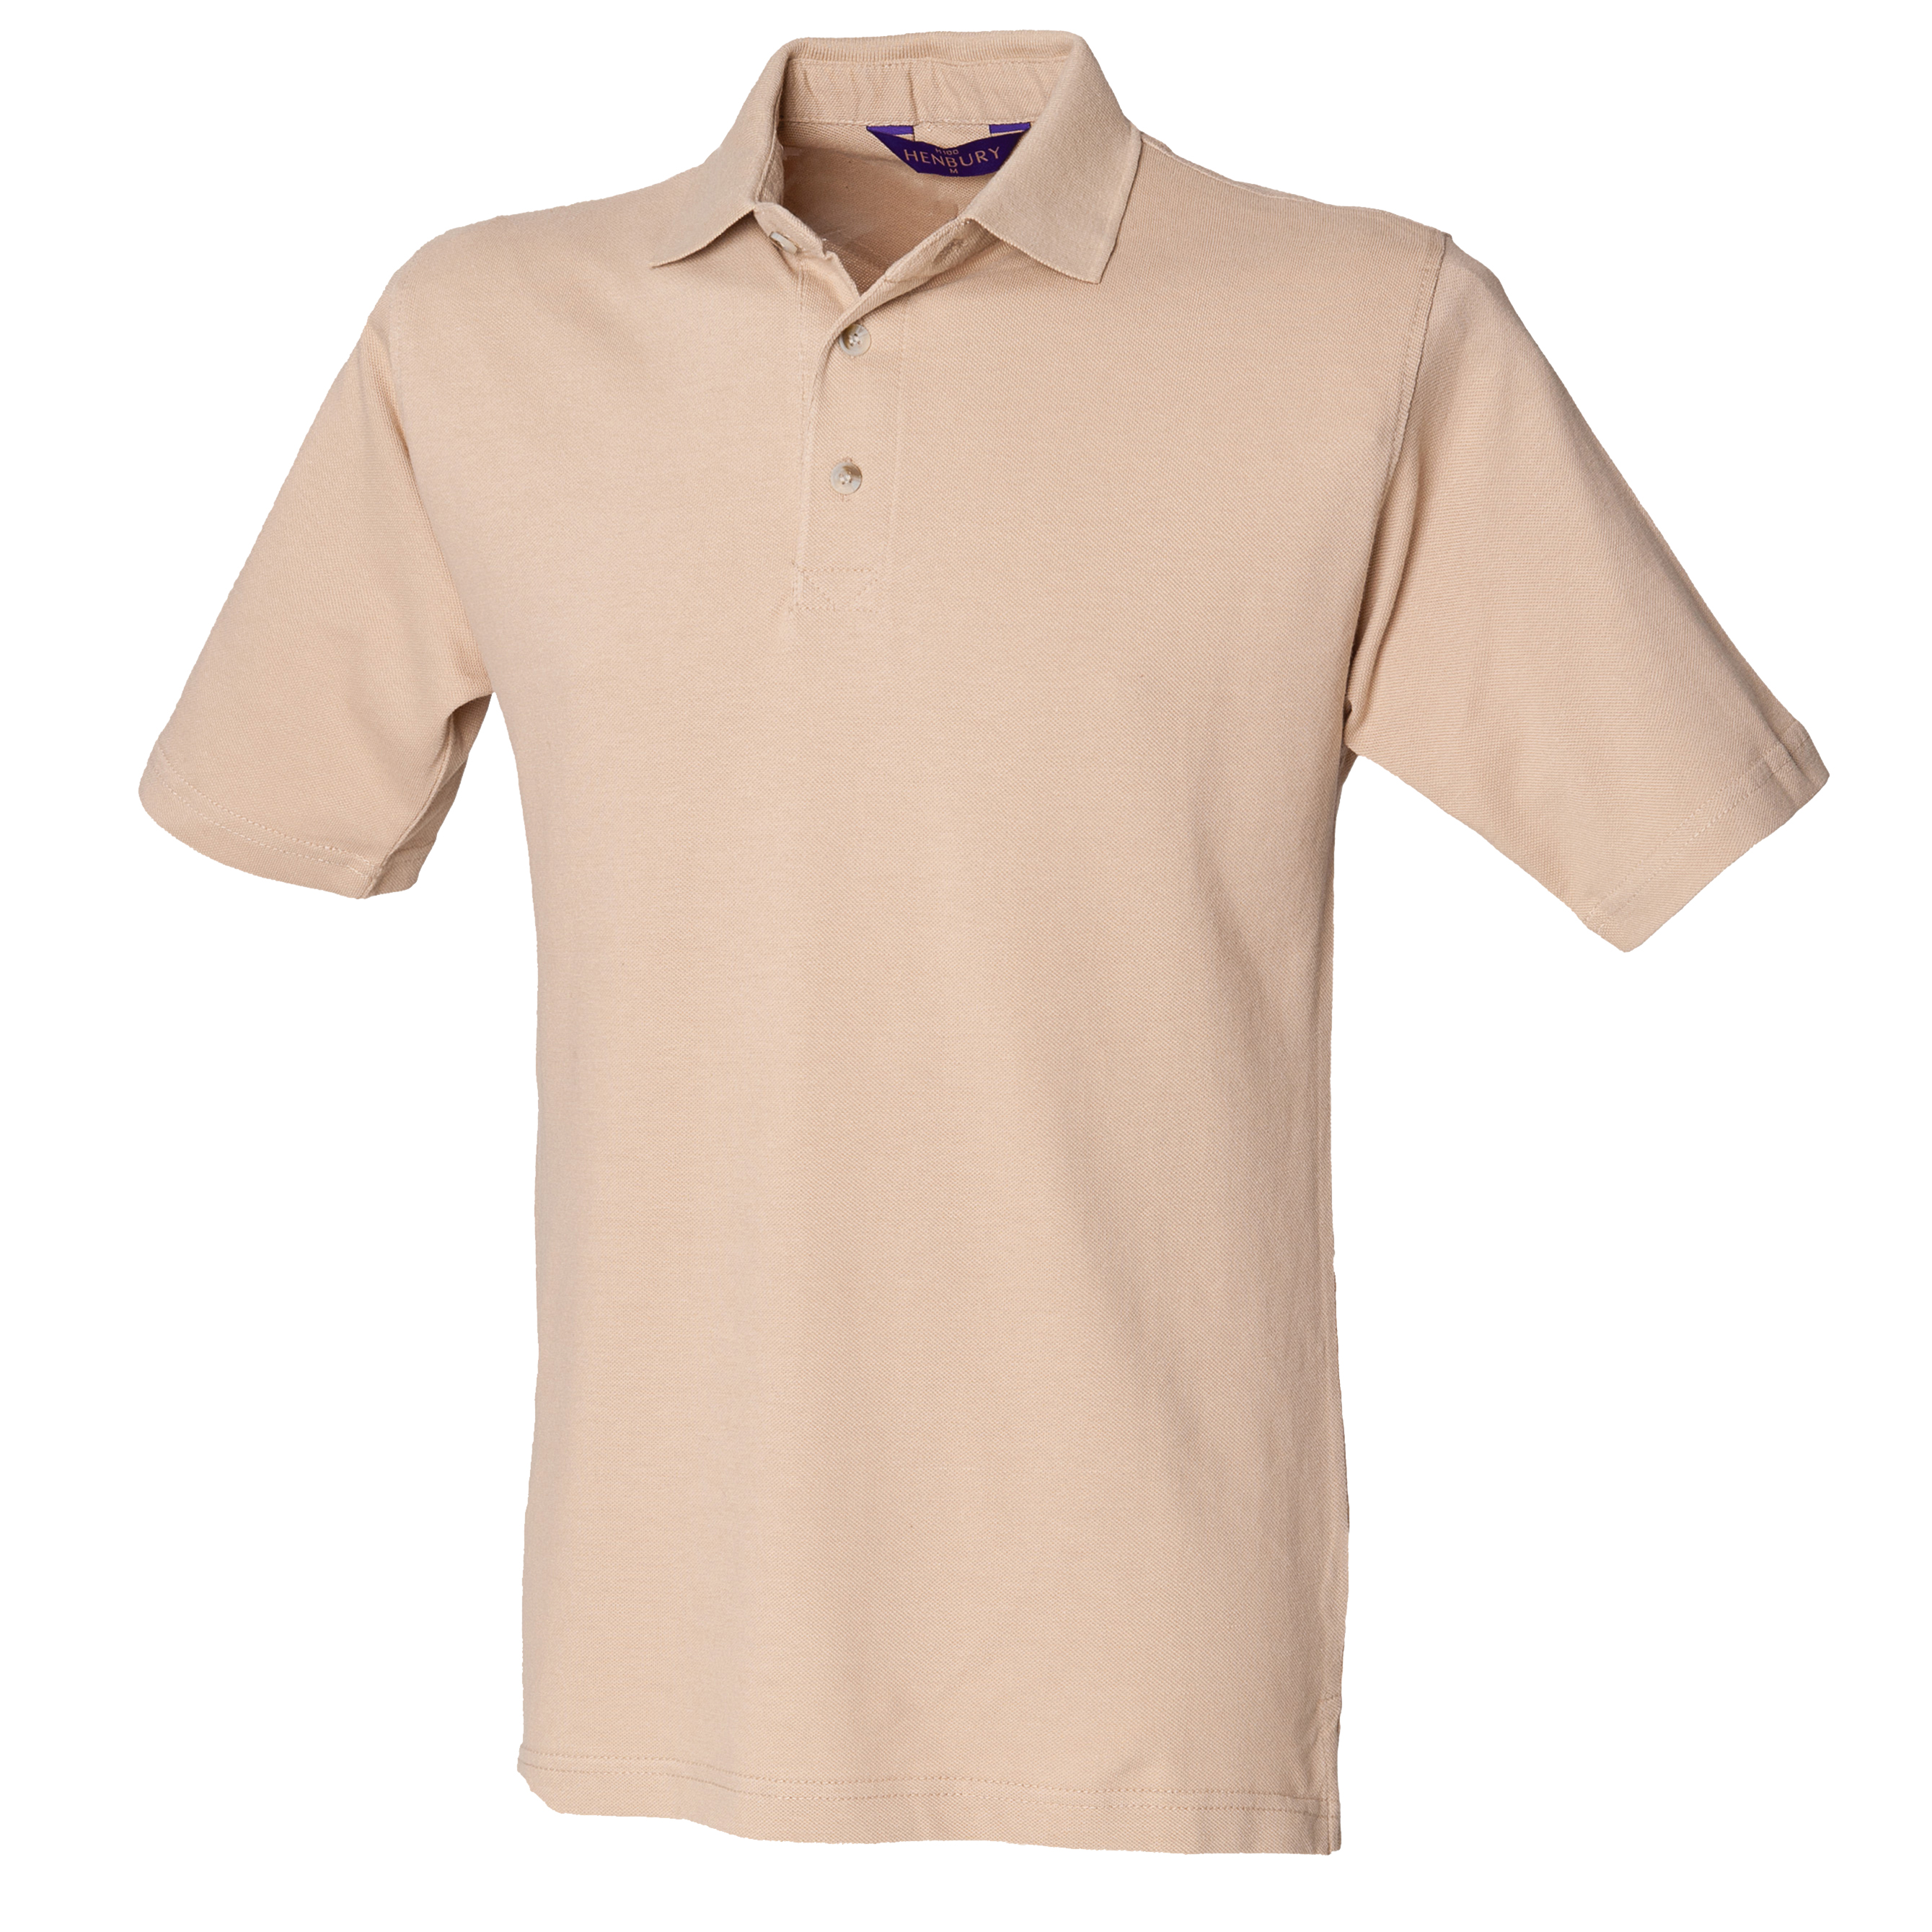 ax-httpswebsystems.s3.amazonaws.comtmp_for_downloadhenbury-classic-cotton-pique-polo-stand-up-camel.jpg